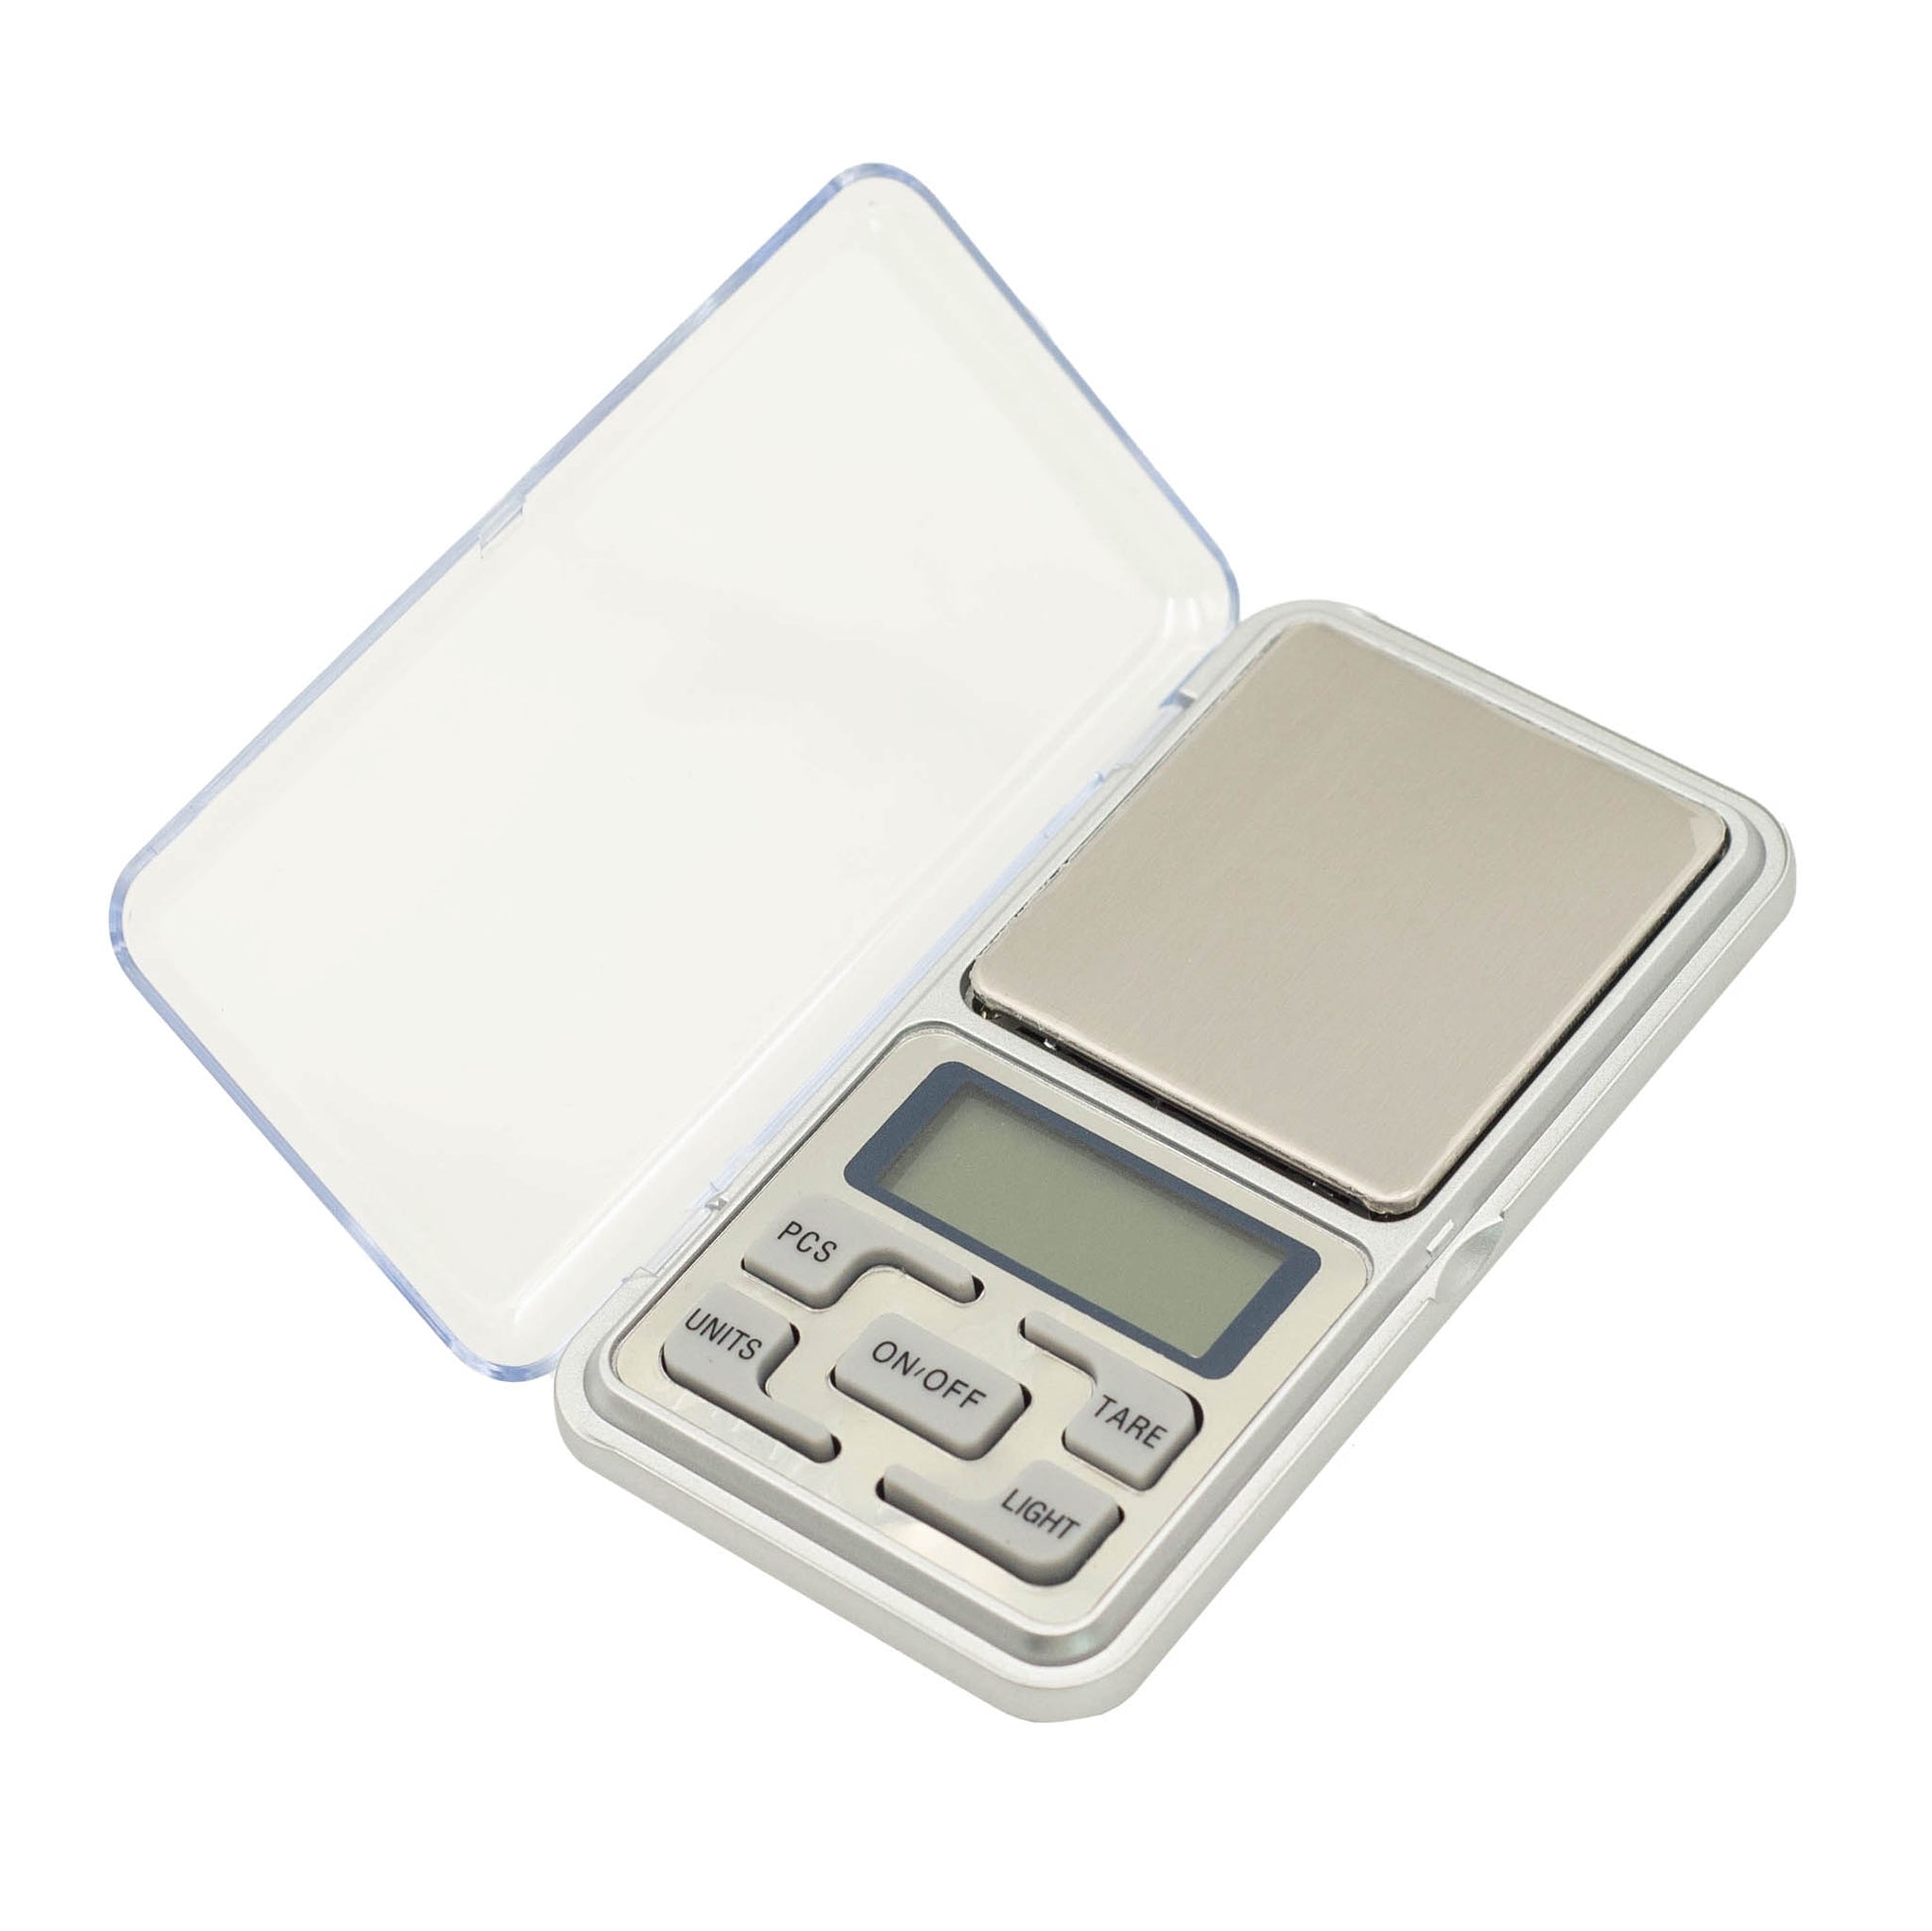 The Mini digital scales are durable, easily calibrated, and retain accuracy over a long period.